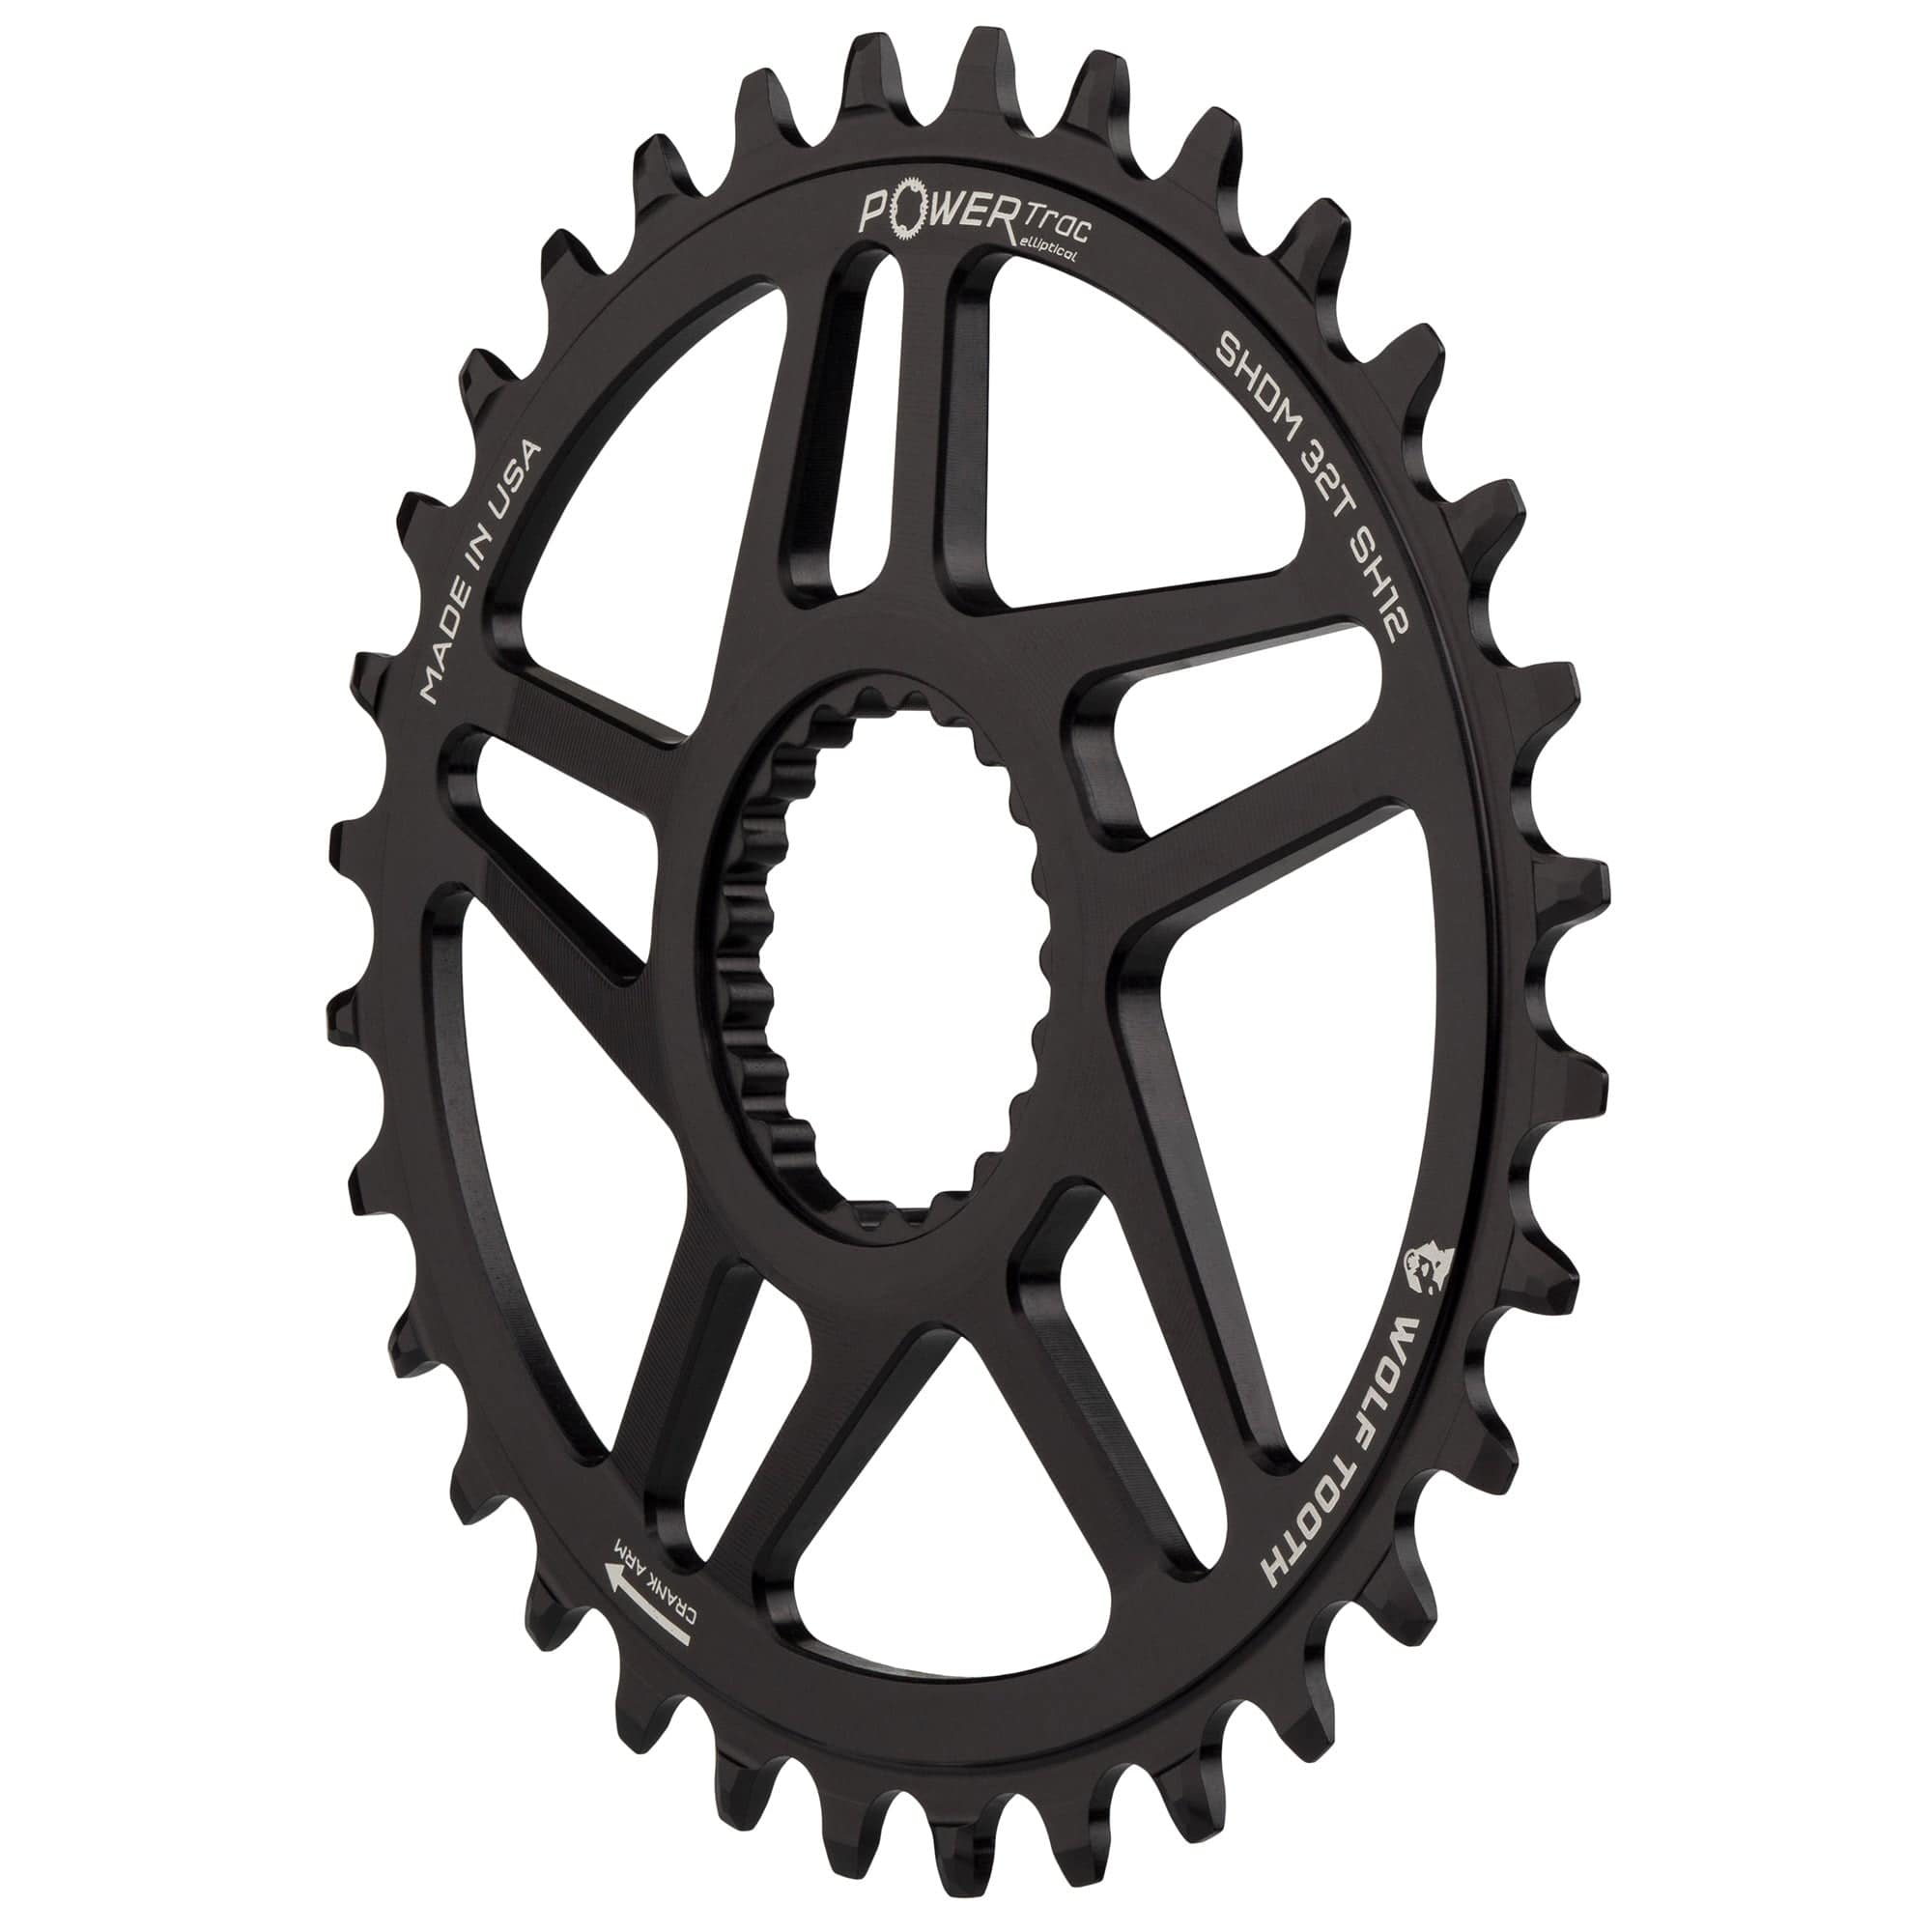 Oval Direct Chainrings for Cranks – Tooth Components